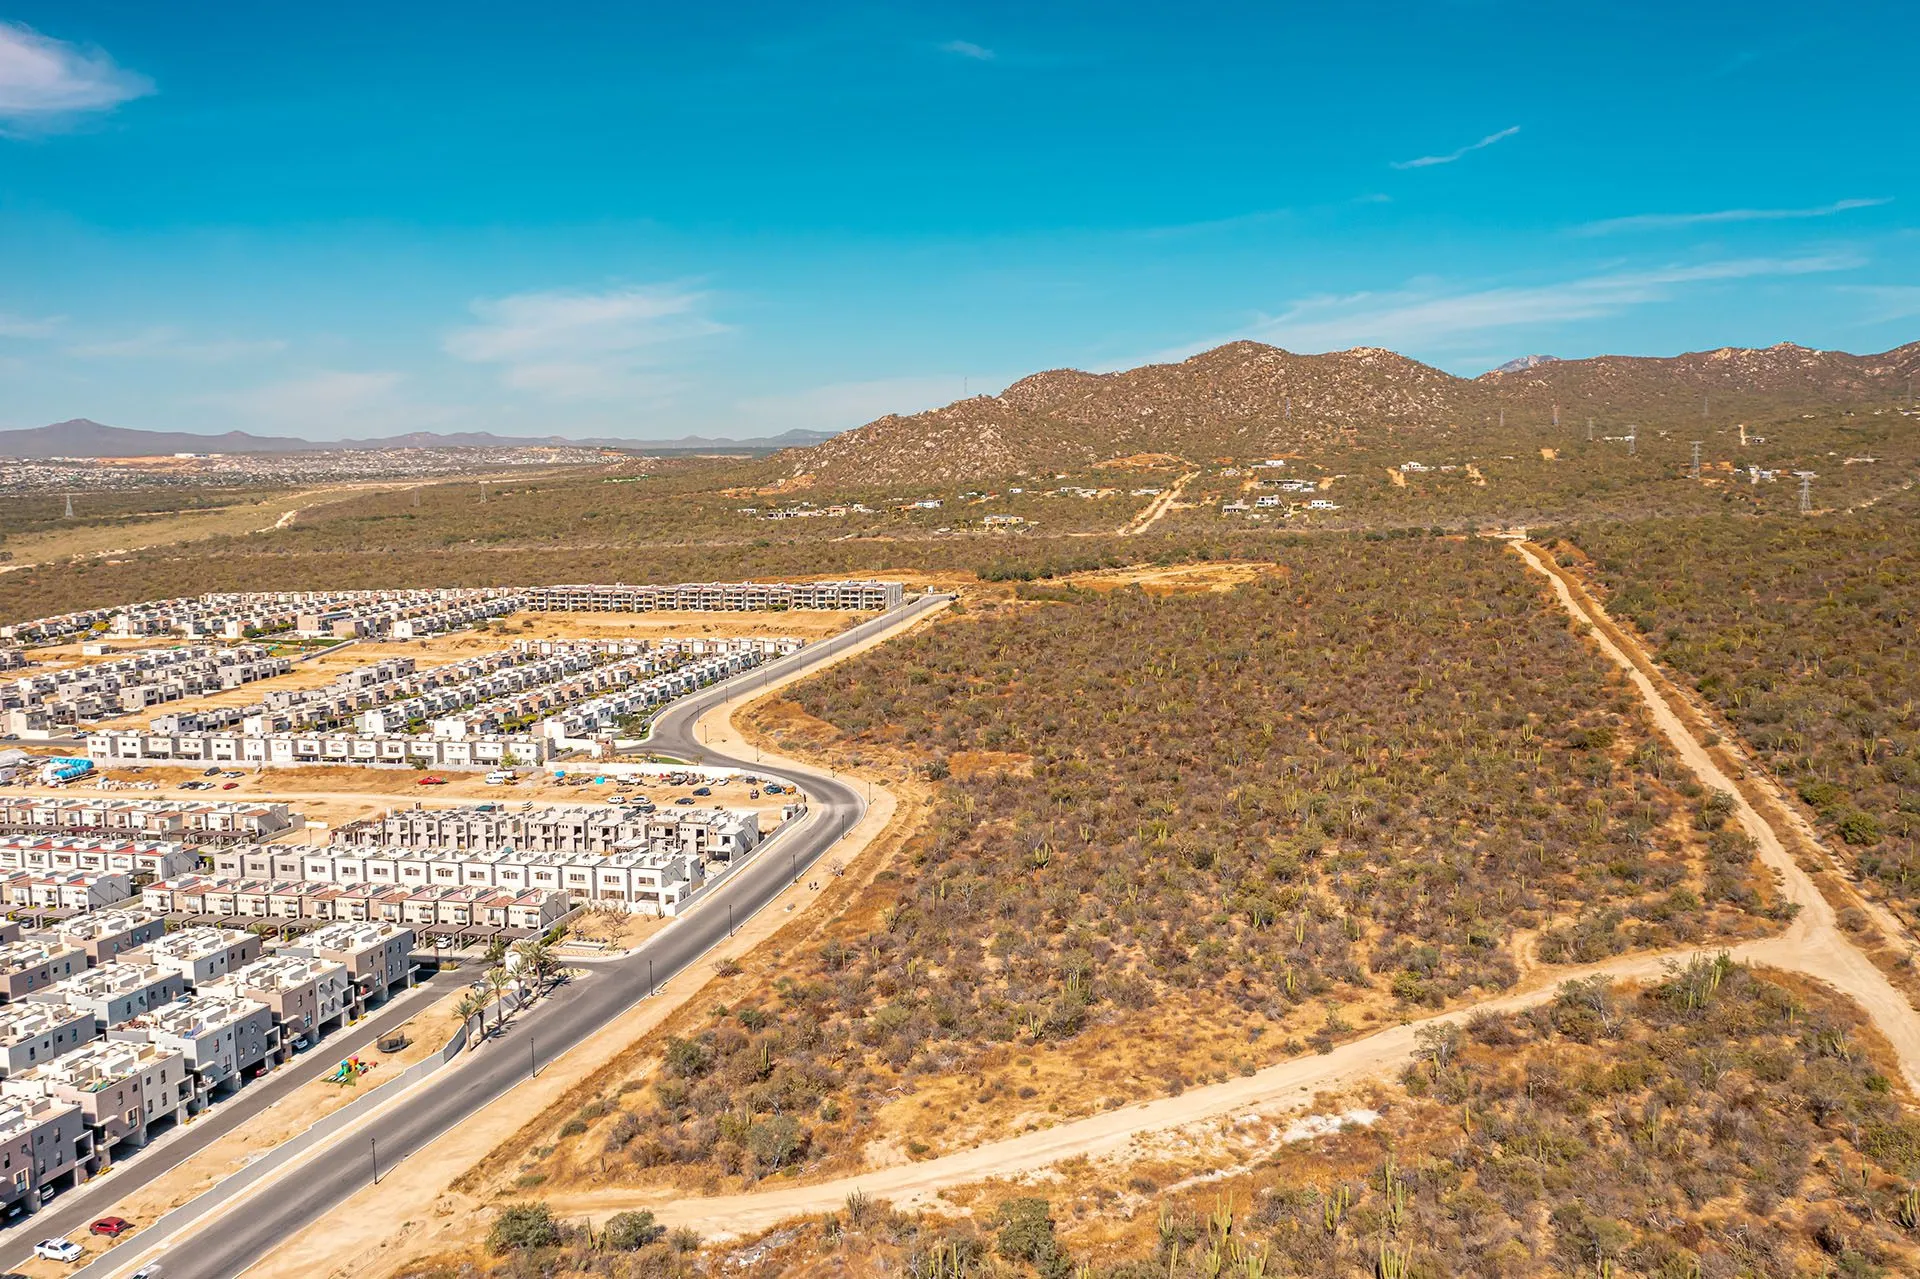 Lot V, is an excellent option for residential development. This 36 acre development parcel is located inside one of the most popular communities in Los Cabos.